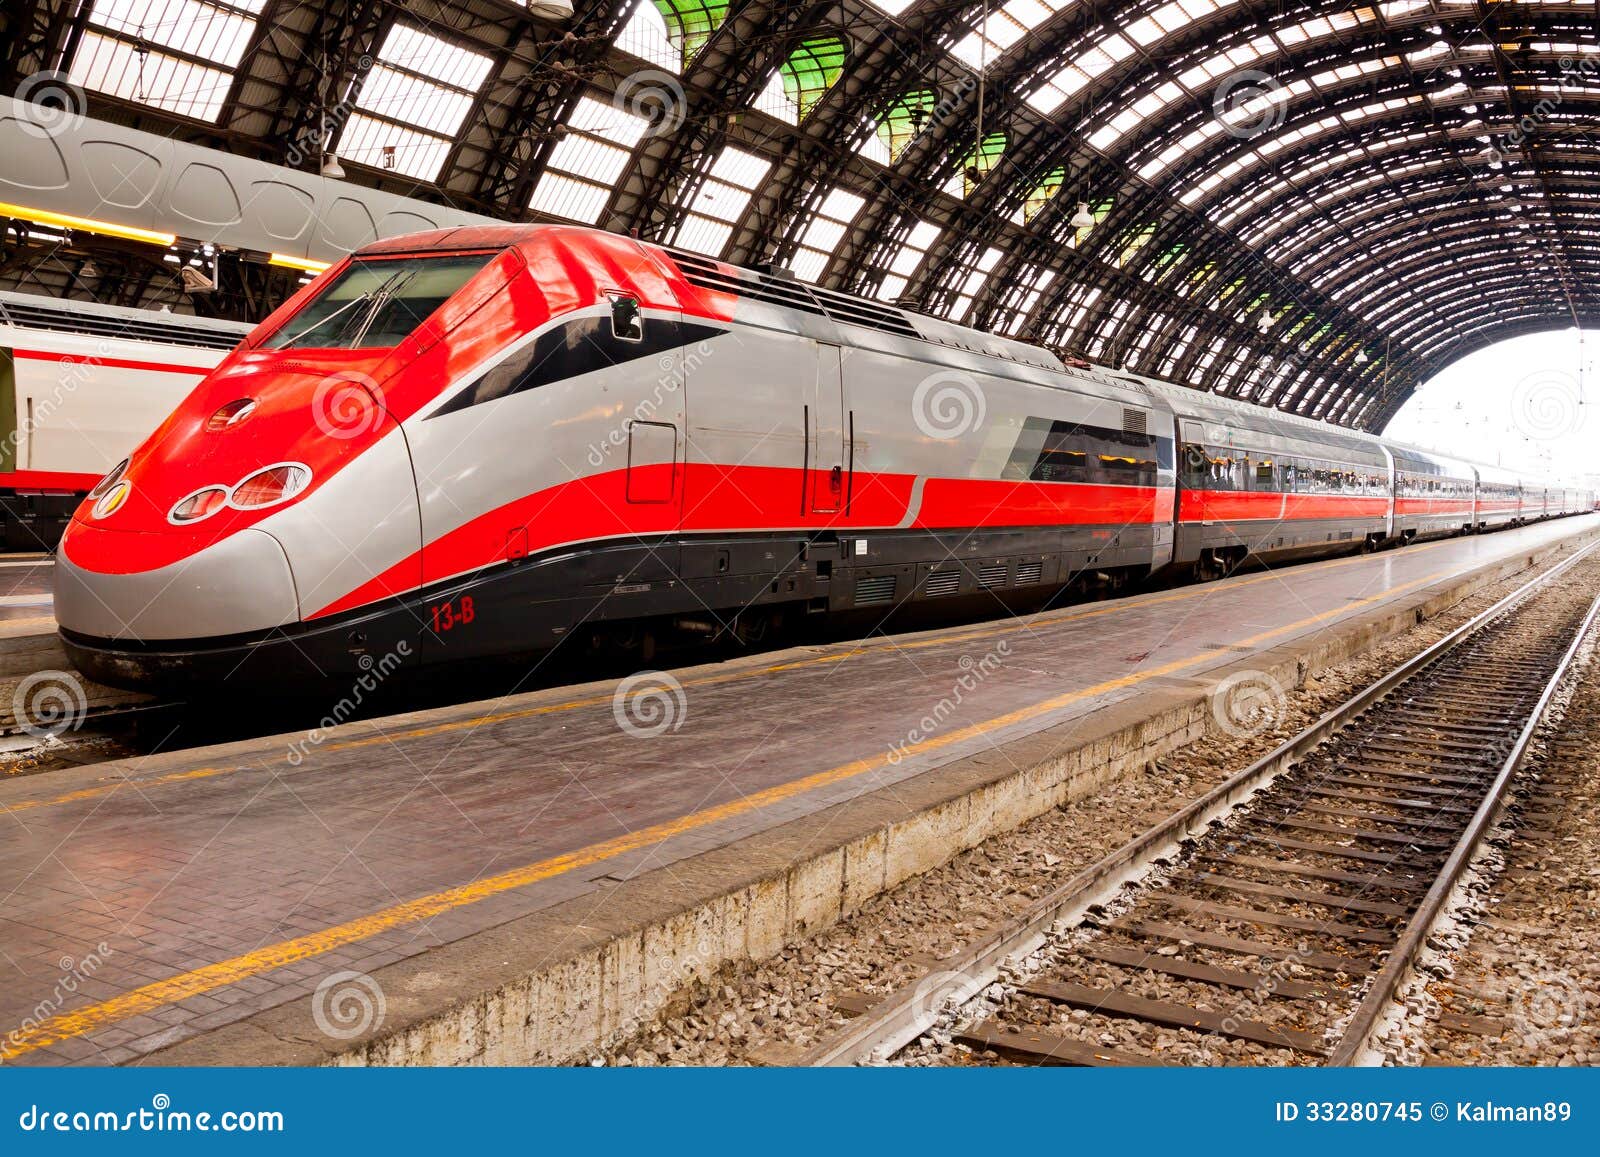 high speed train in italy